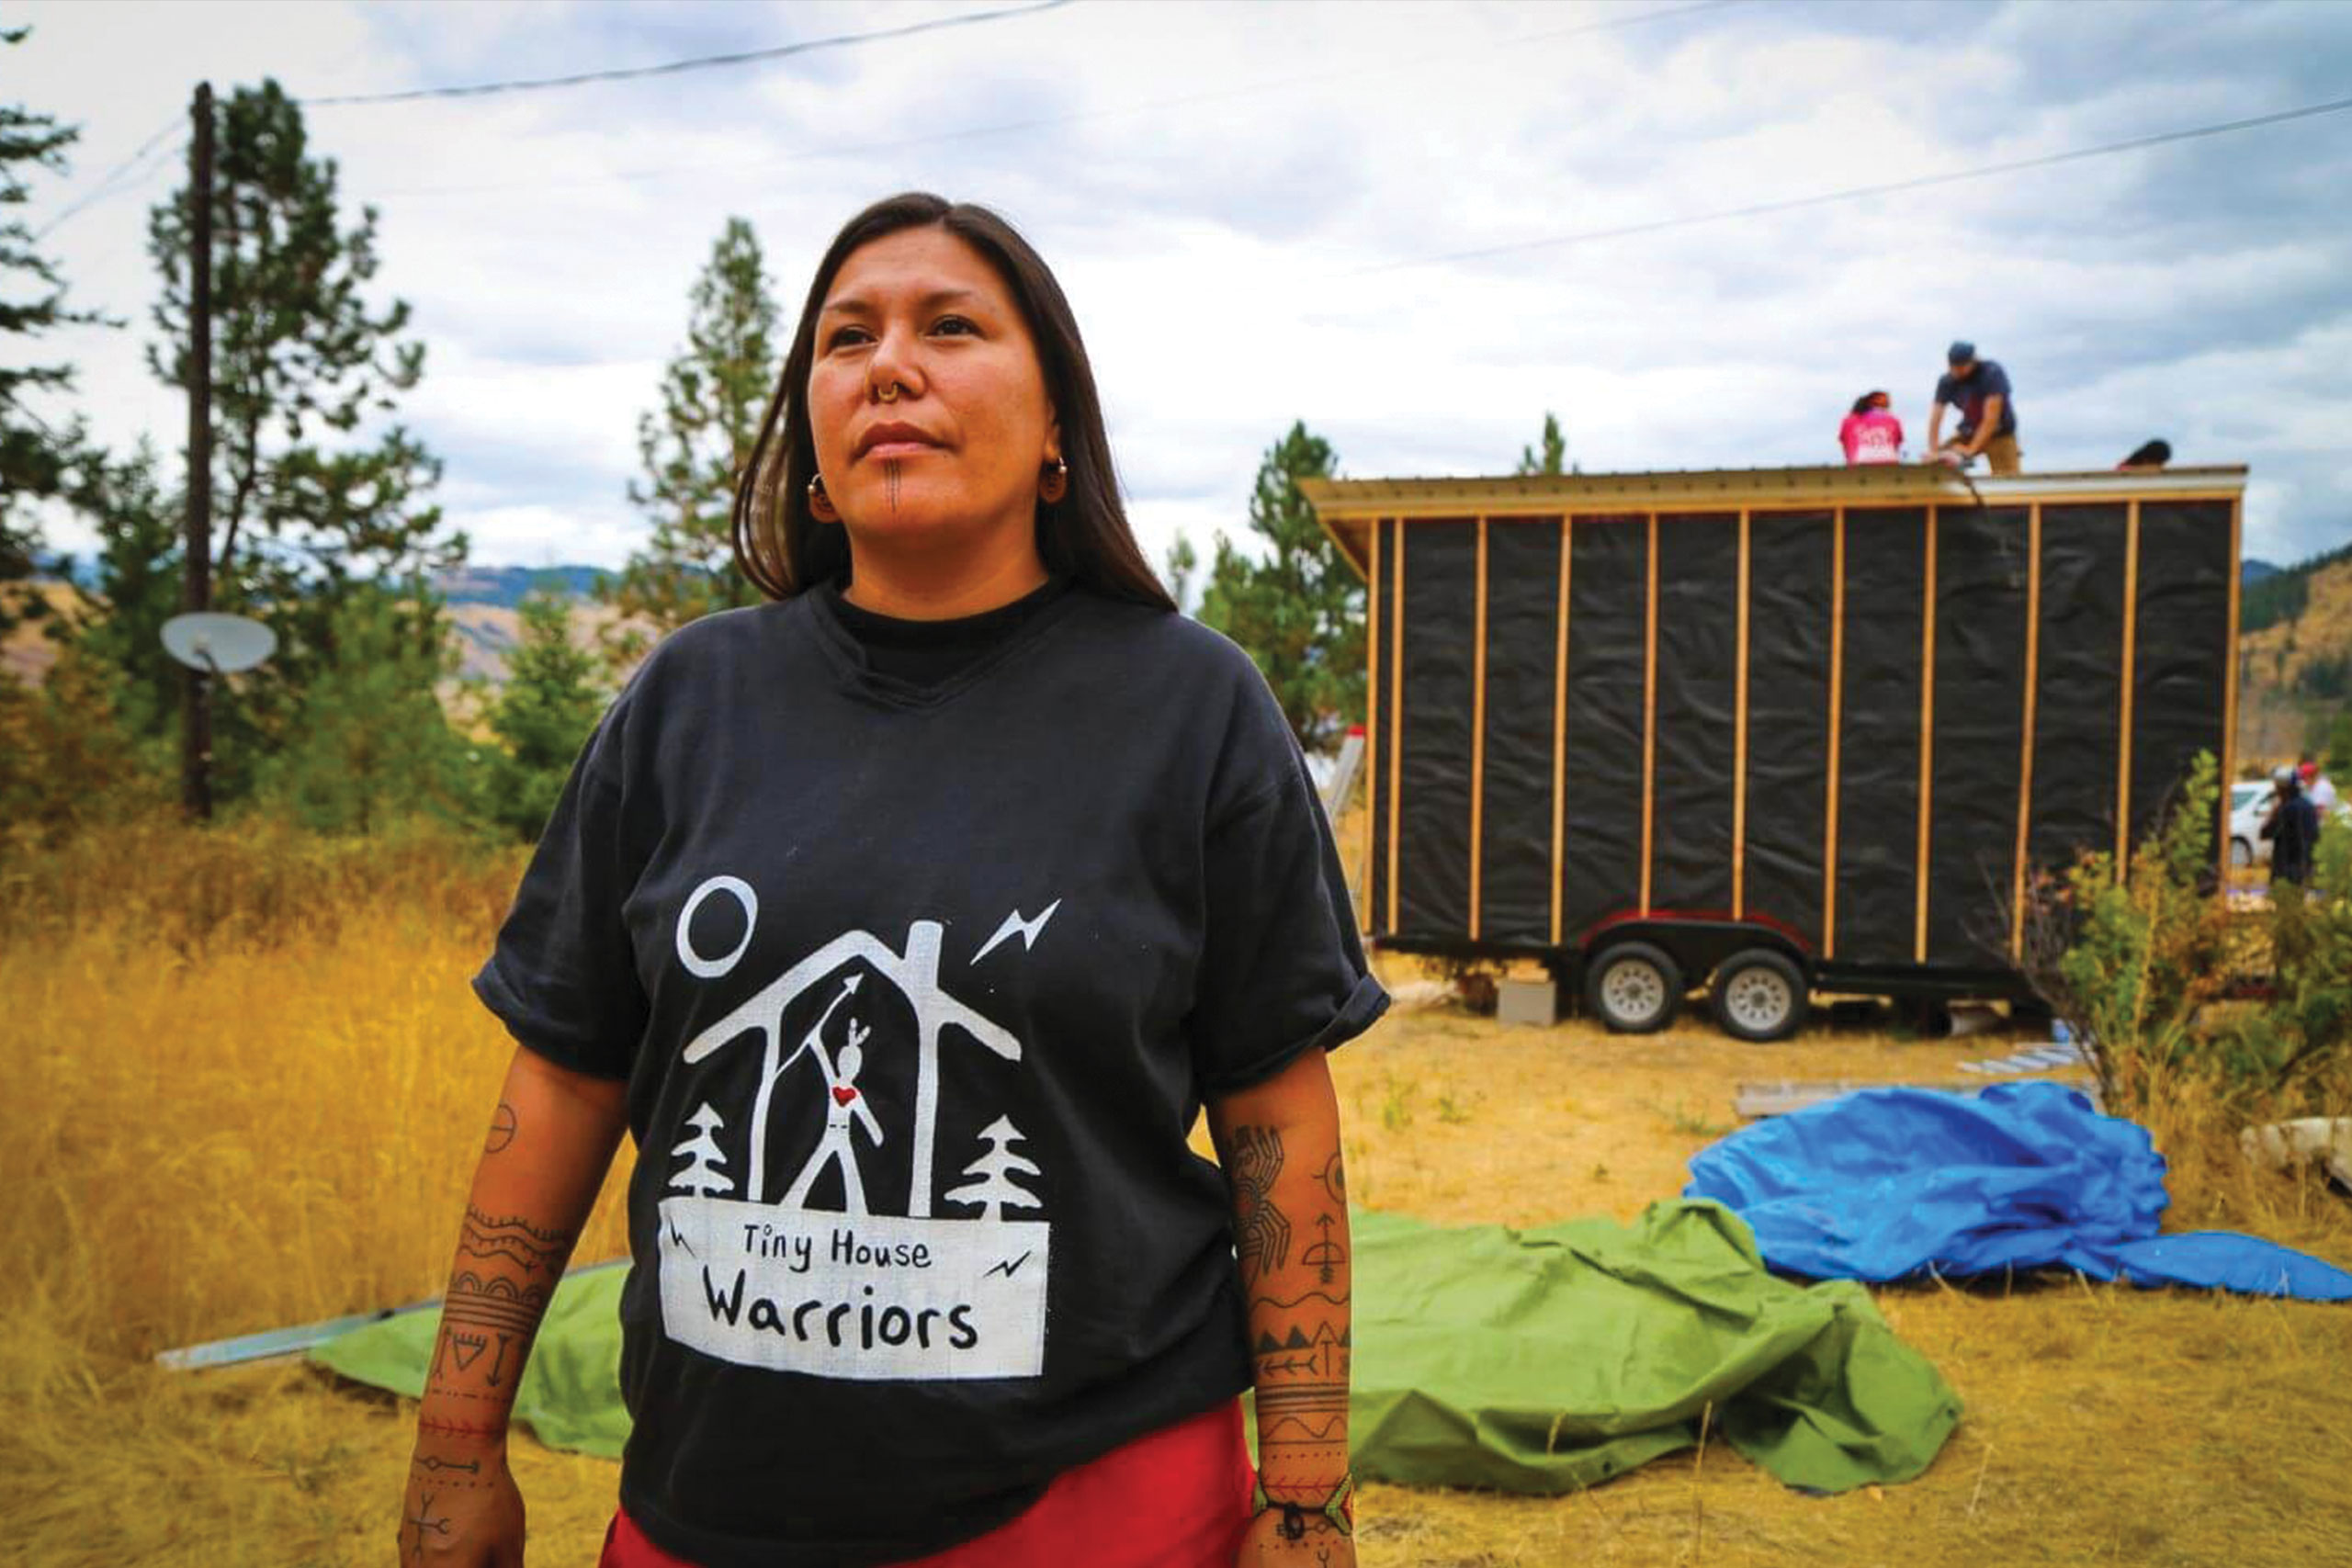 Tiny House Warriors Criminalized for Protecting Homelands